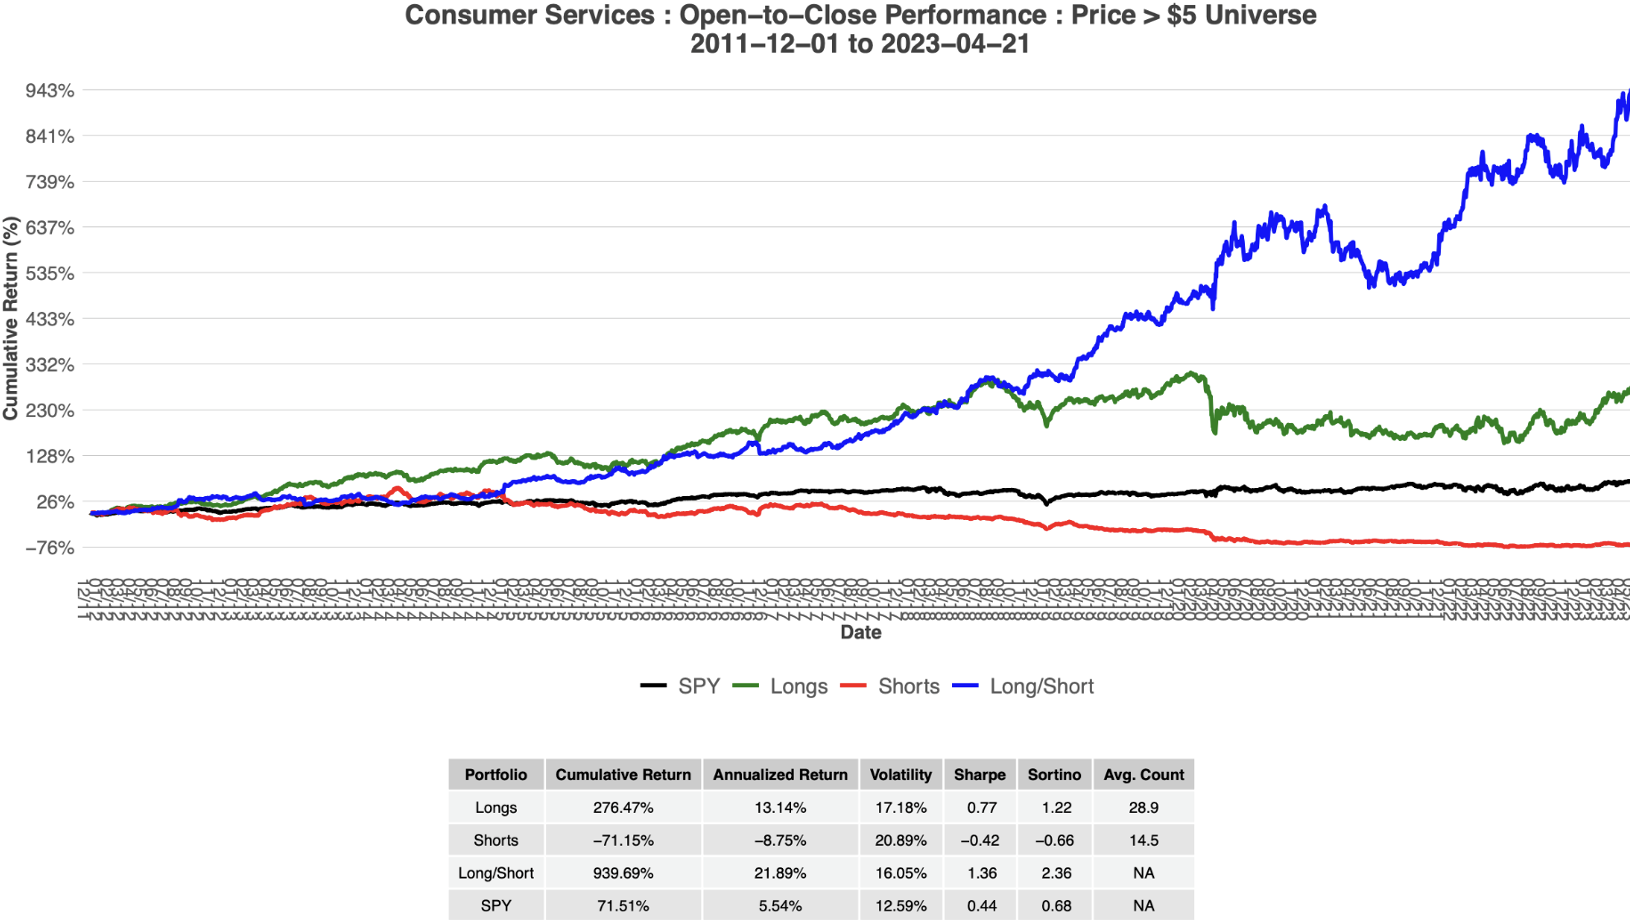 Consumer Services: Open-to-close Performance: Price > $5 Universe